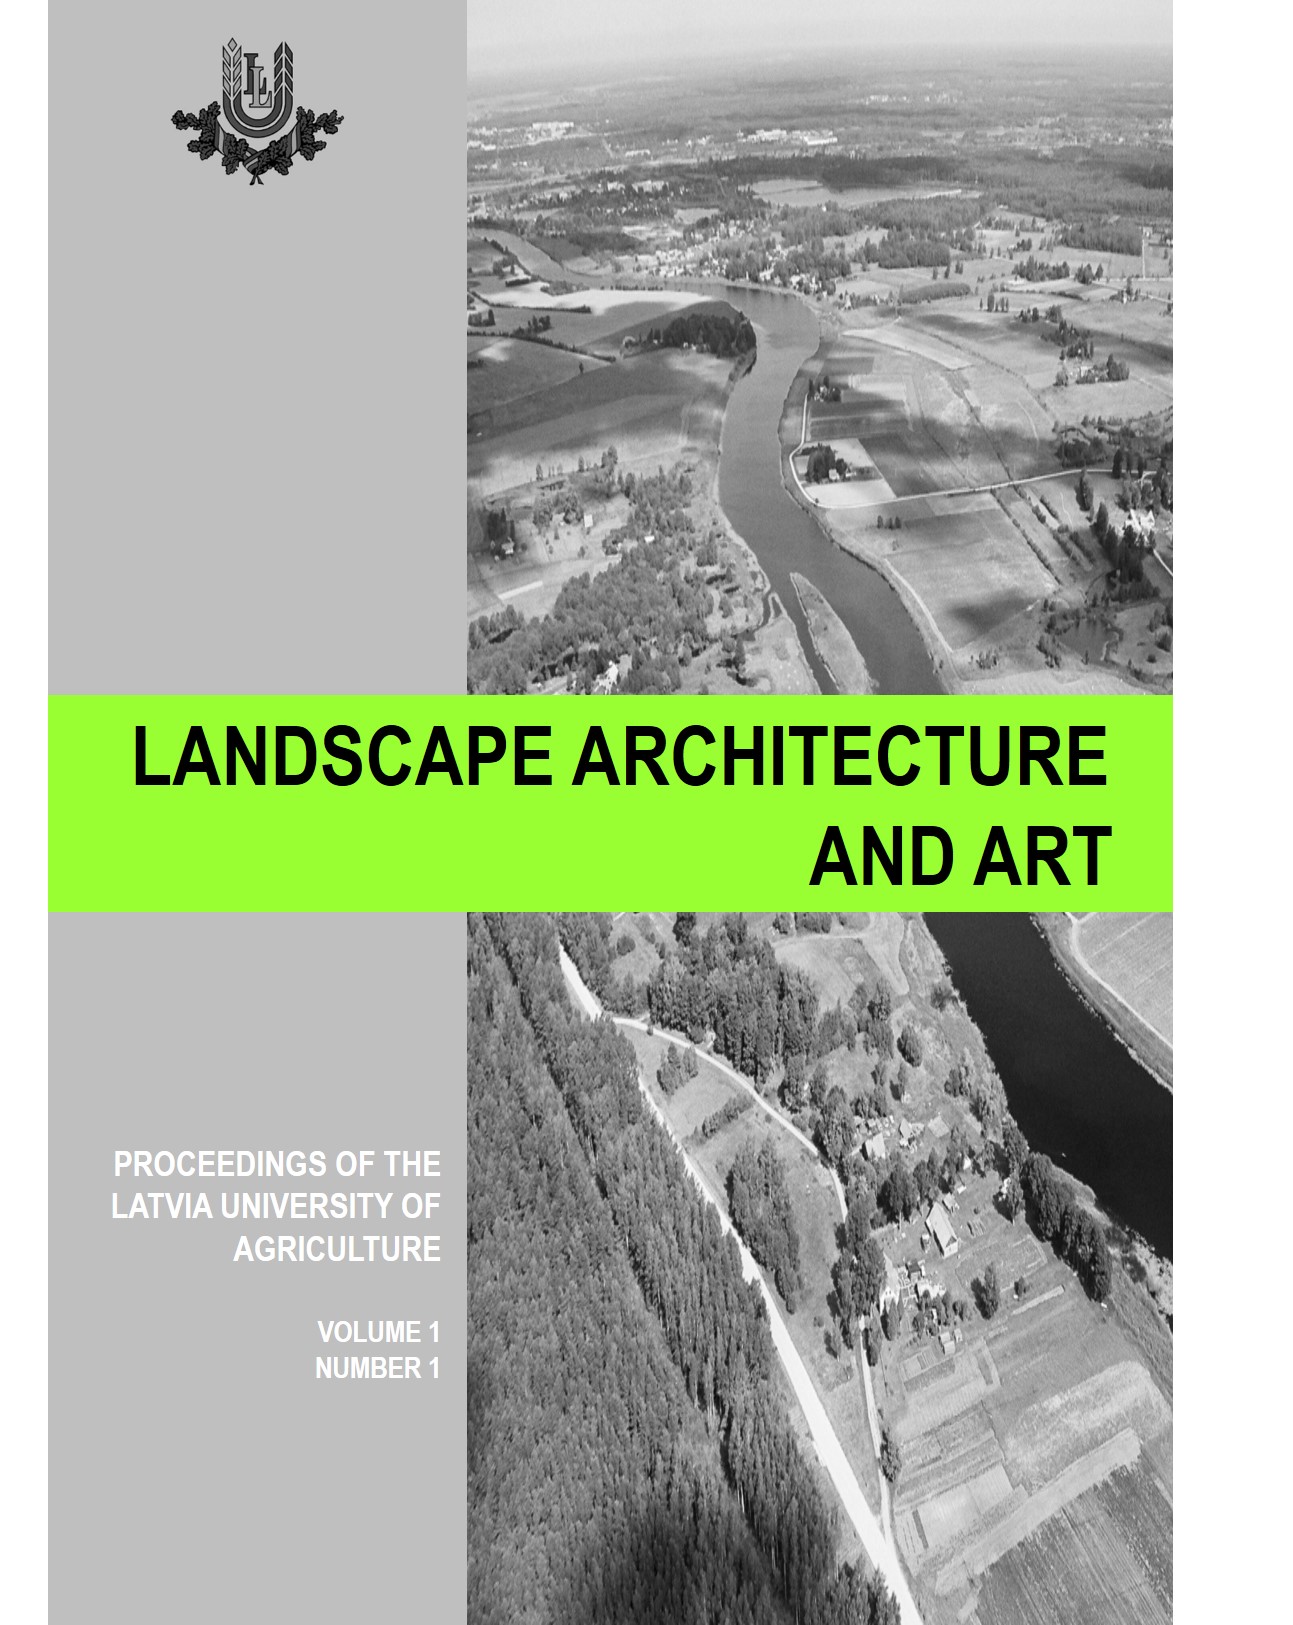 Landscape Architecture and Art, Volume 1, Number 1